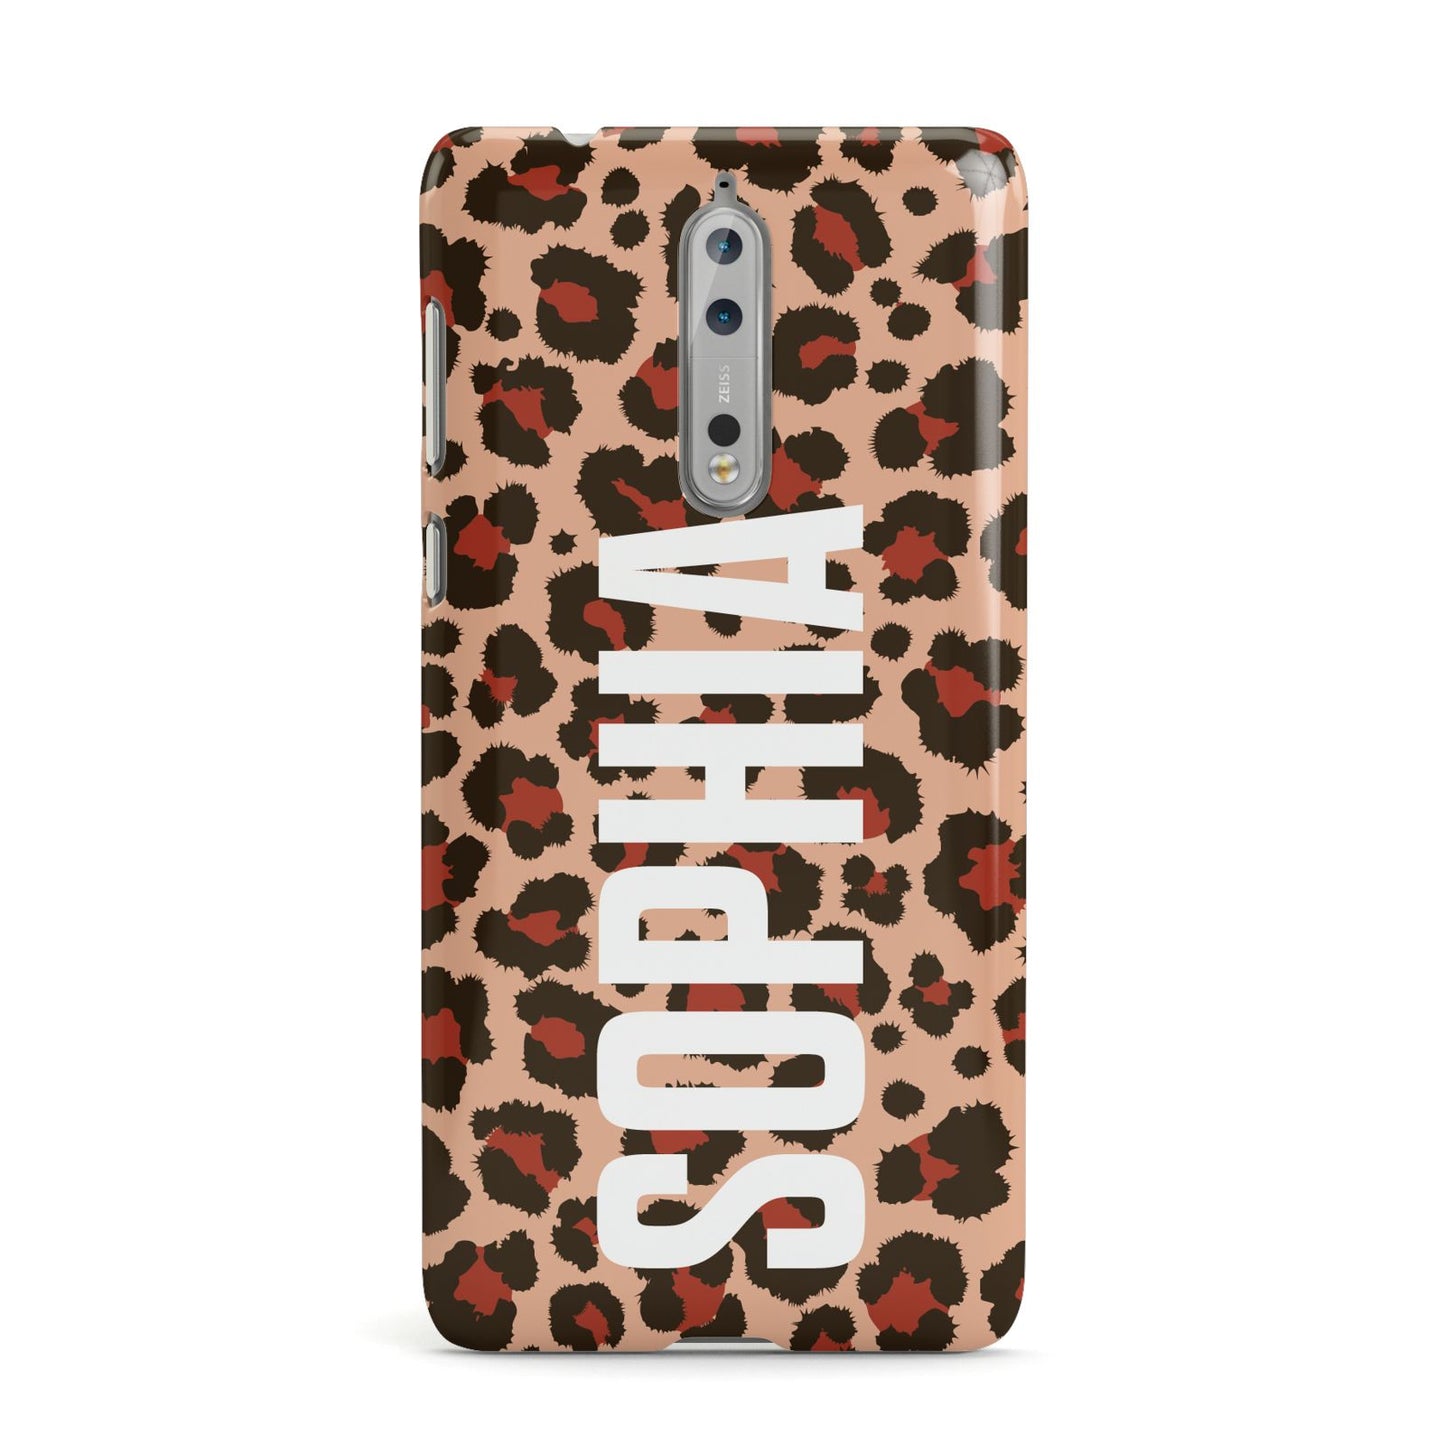 Personalised Leopard Print Name Nokia Case